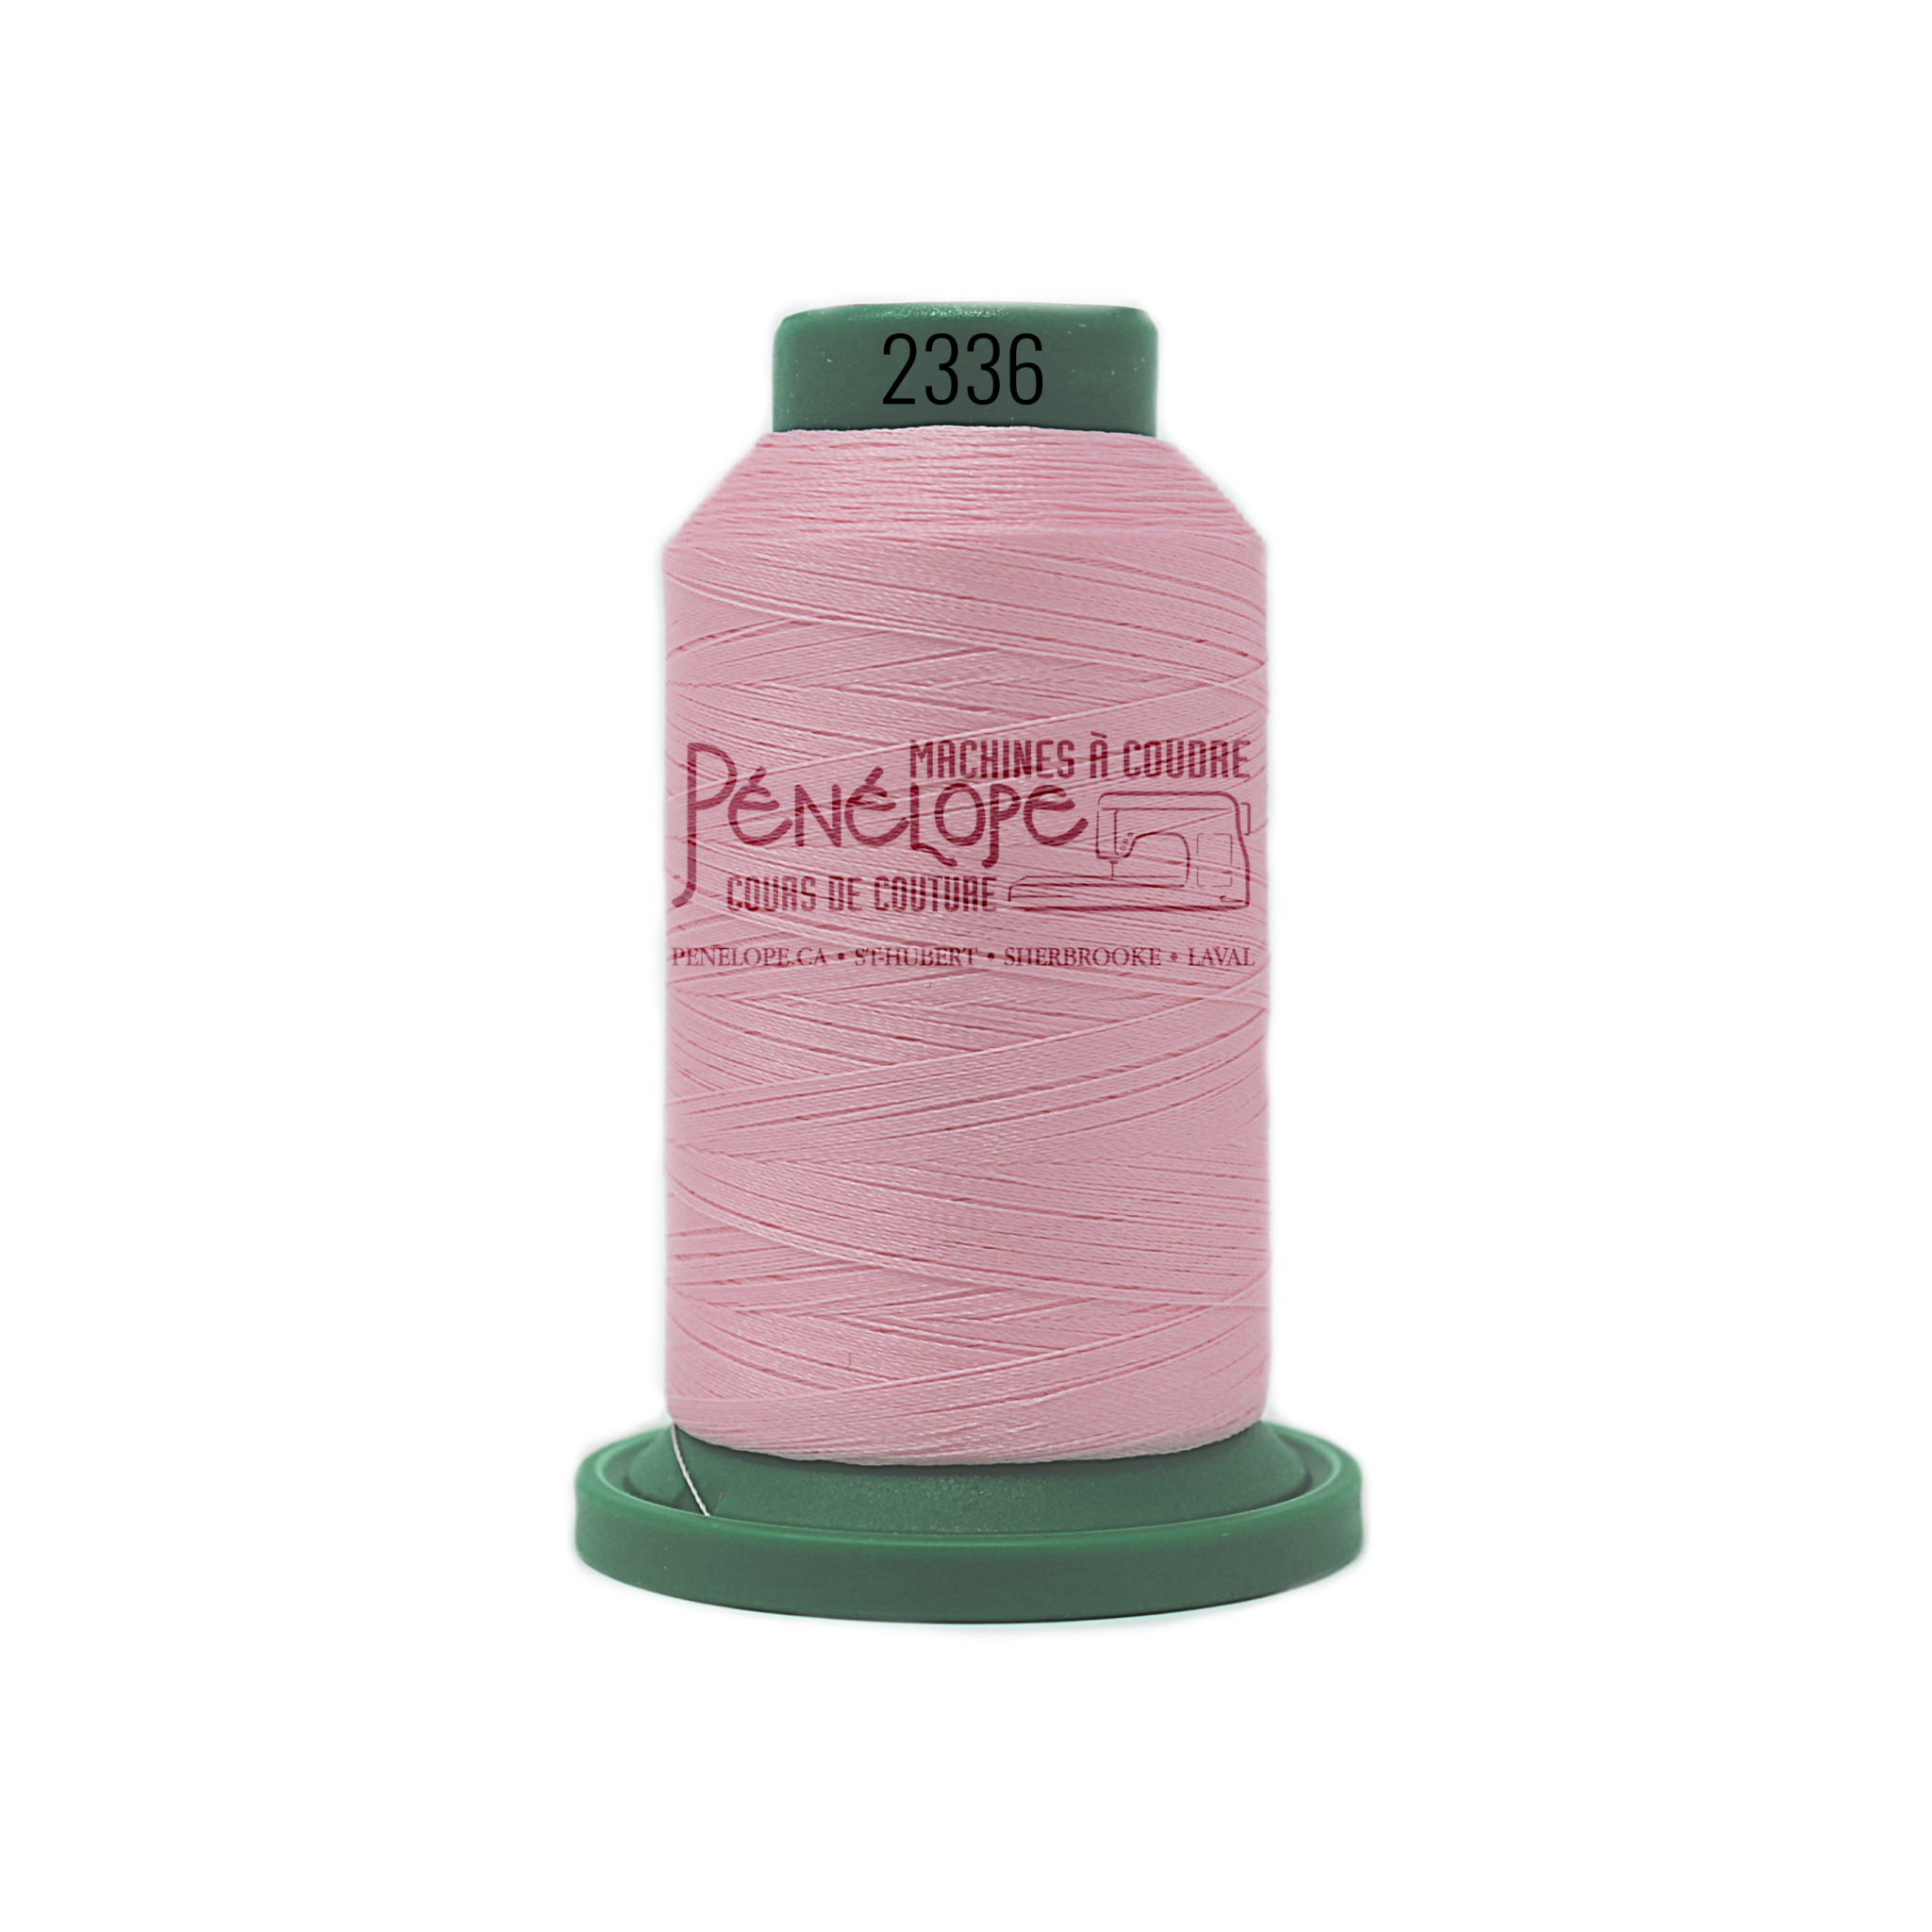 Isacord Isacord sewing and embroidery thread 2363